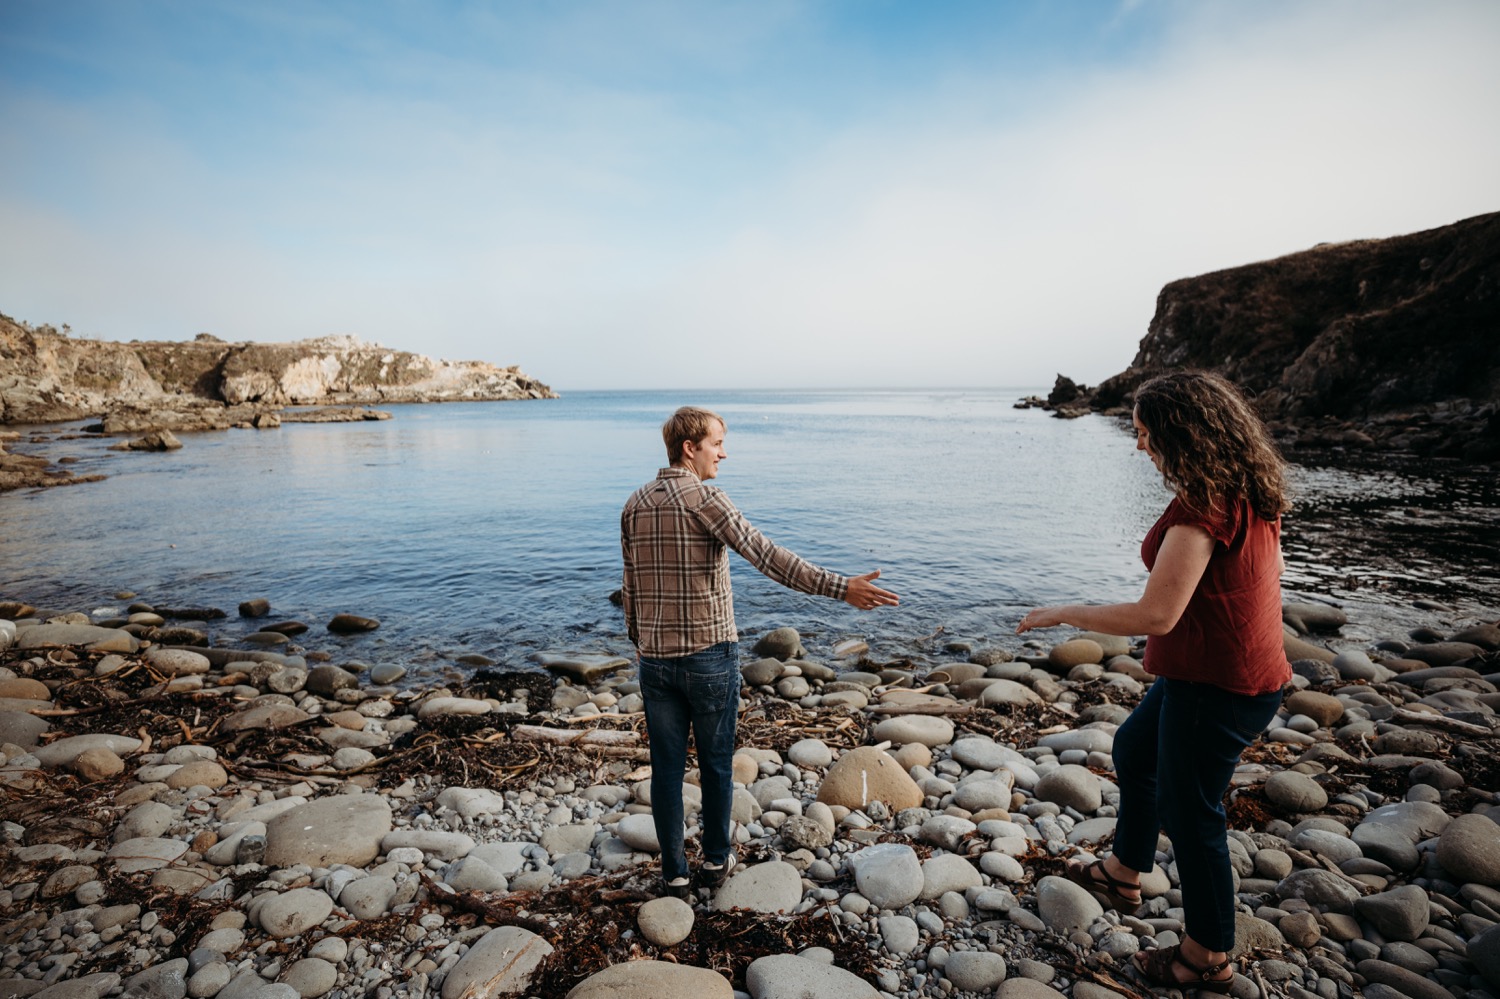 Man reaches his hand out to help his fiance across a rocky beach in Salt Point Park during their engagement photoshoot.